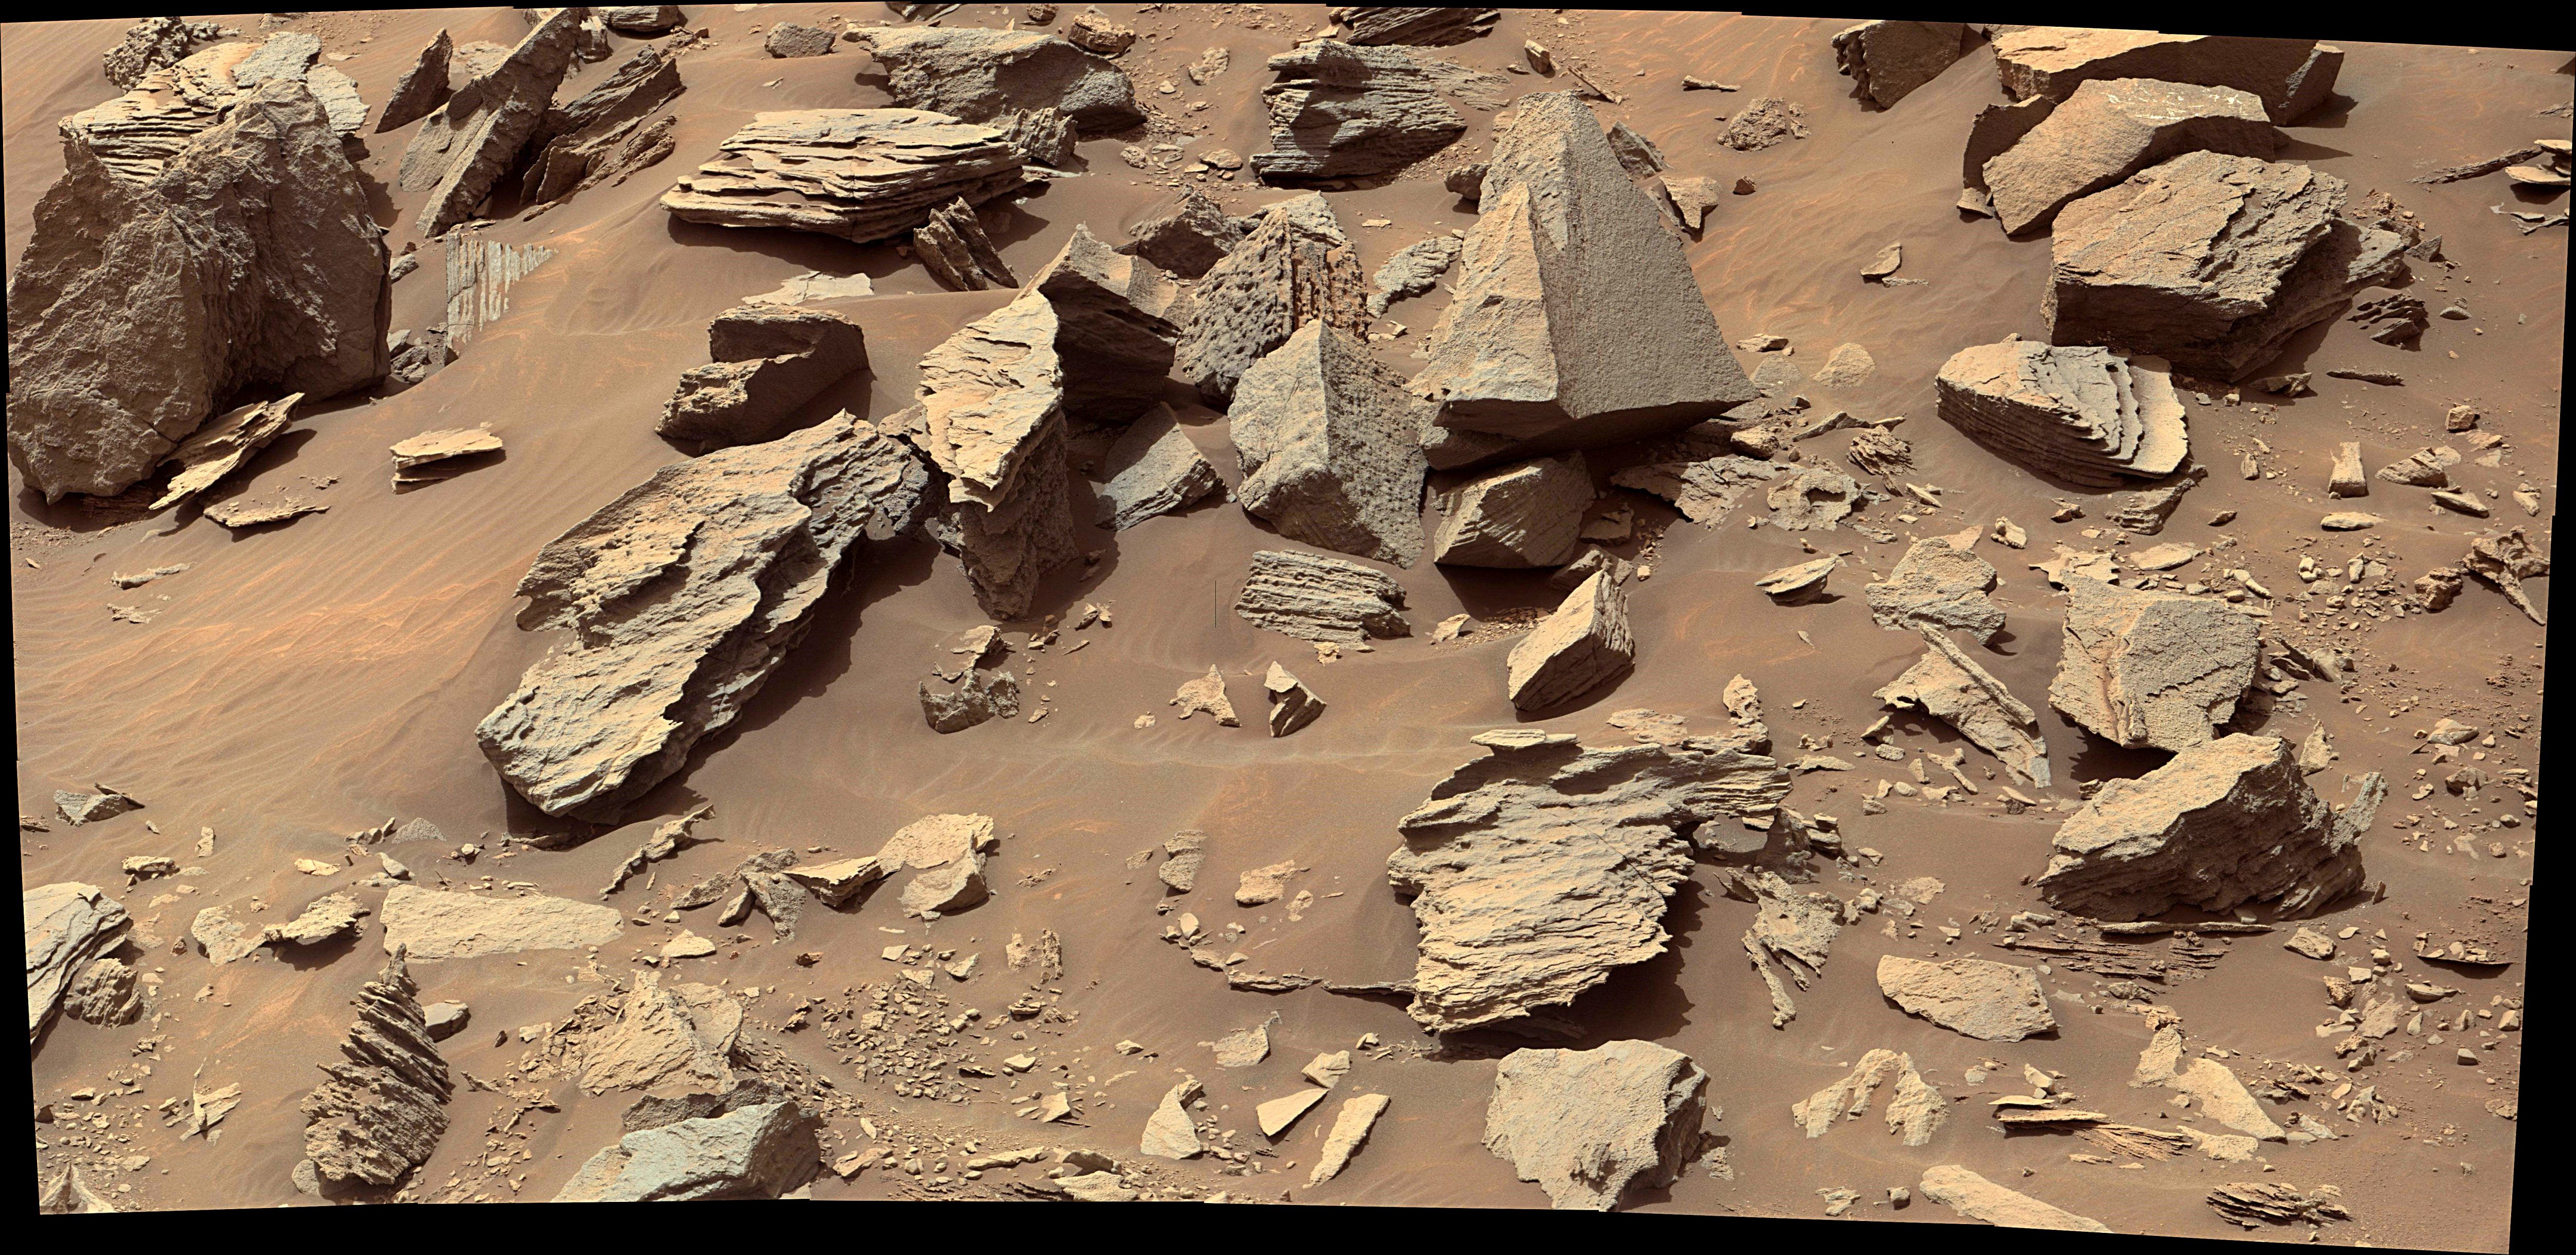 panoramic-curiosity-rover-view-2e-sol-1459-was-life-on-mars